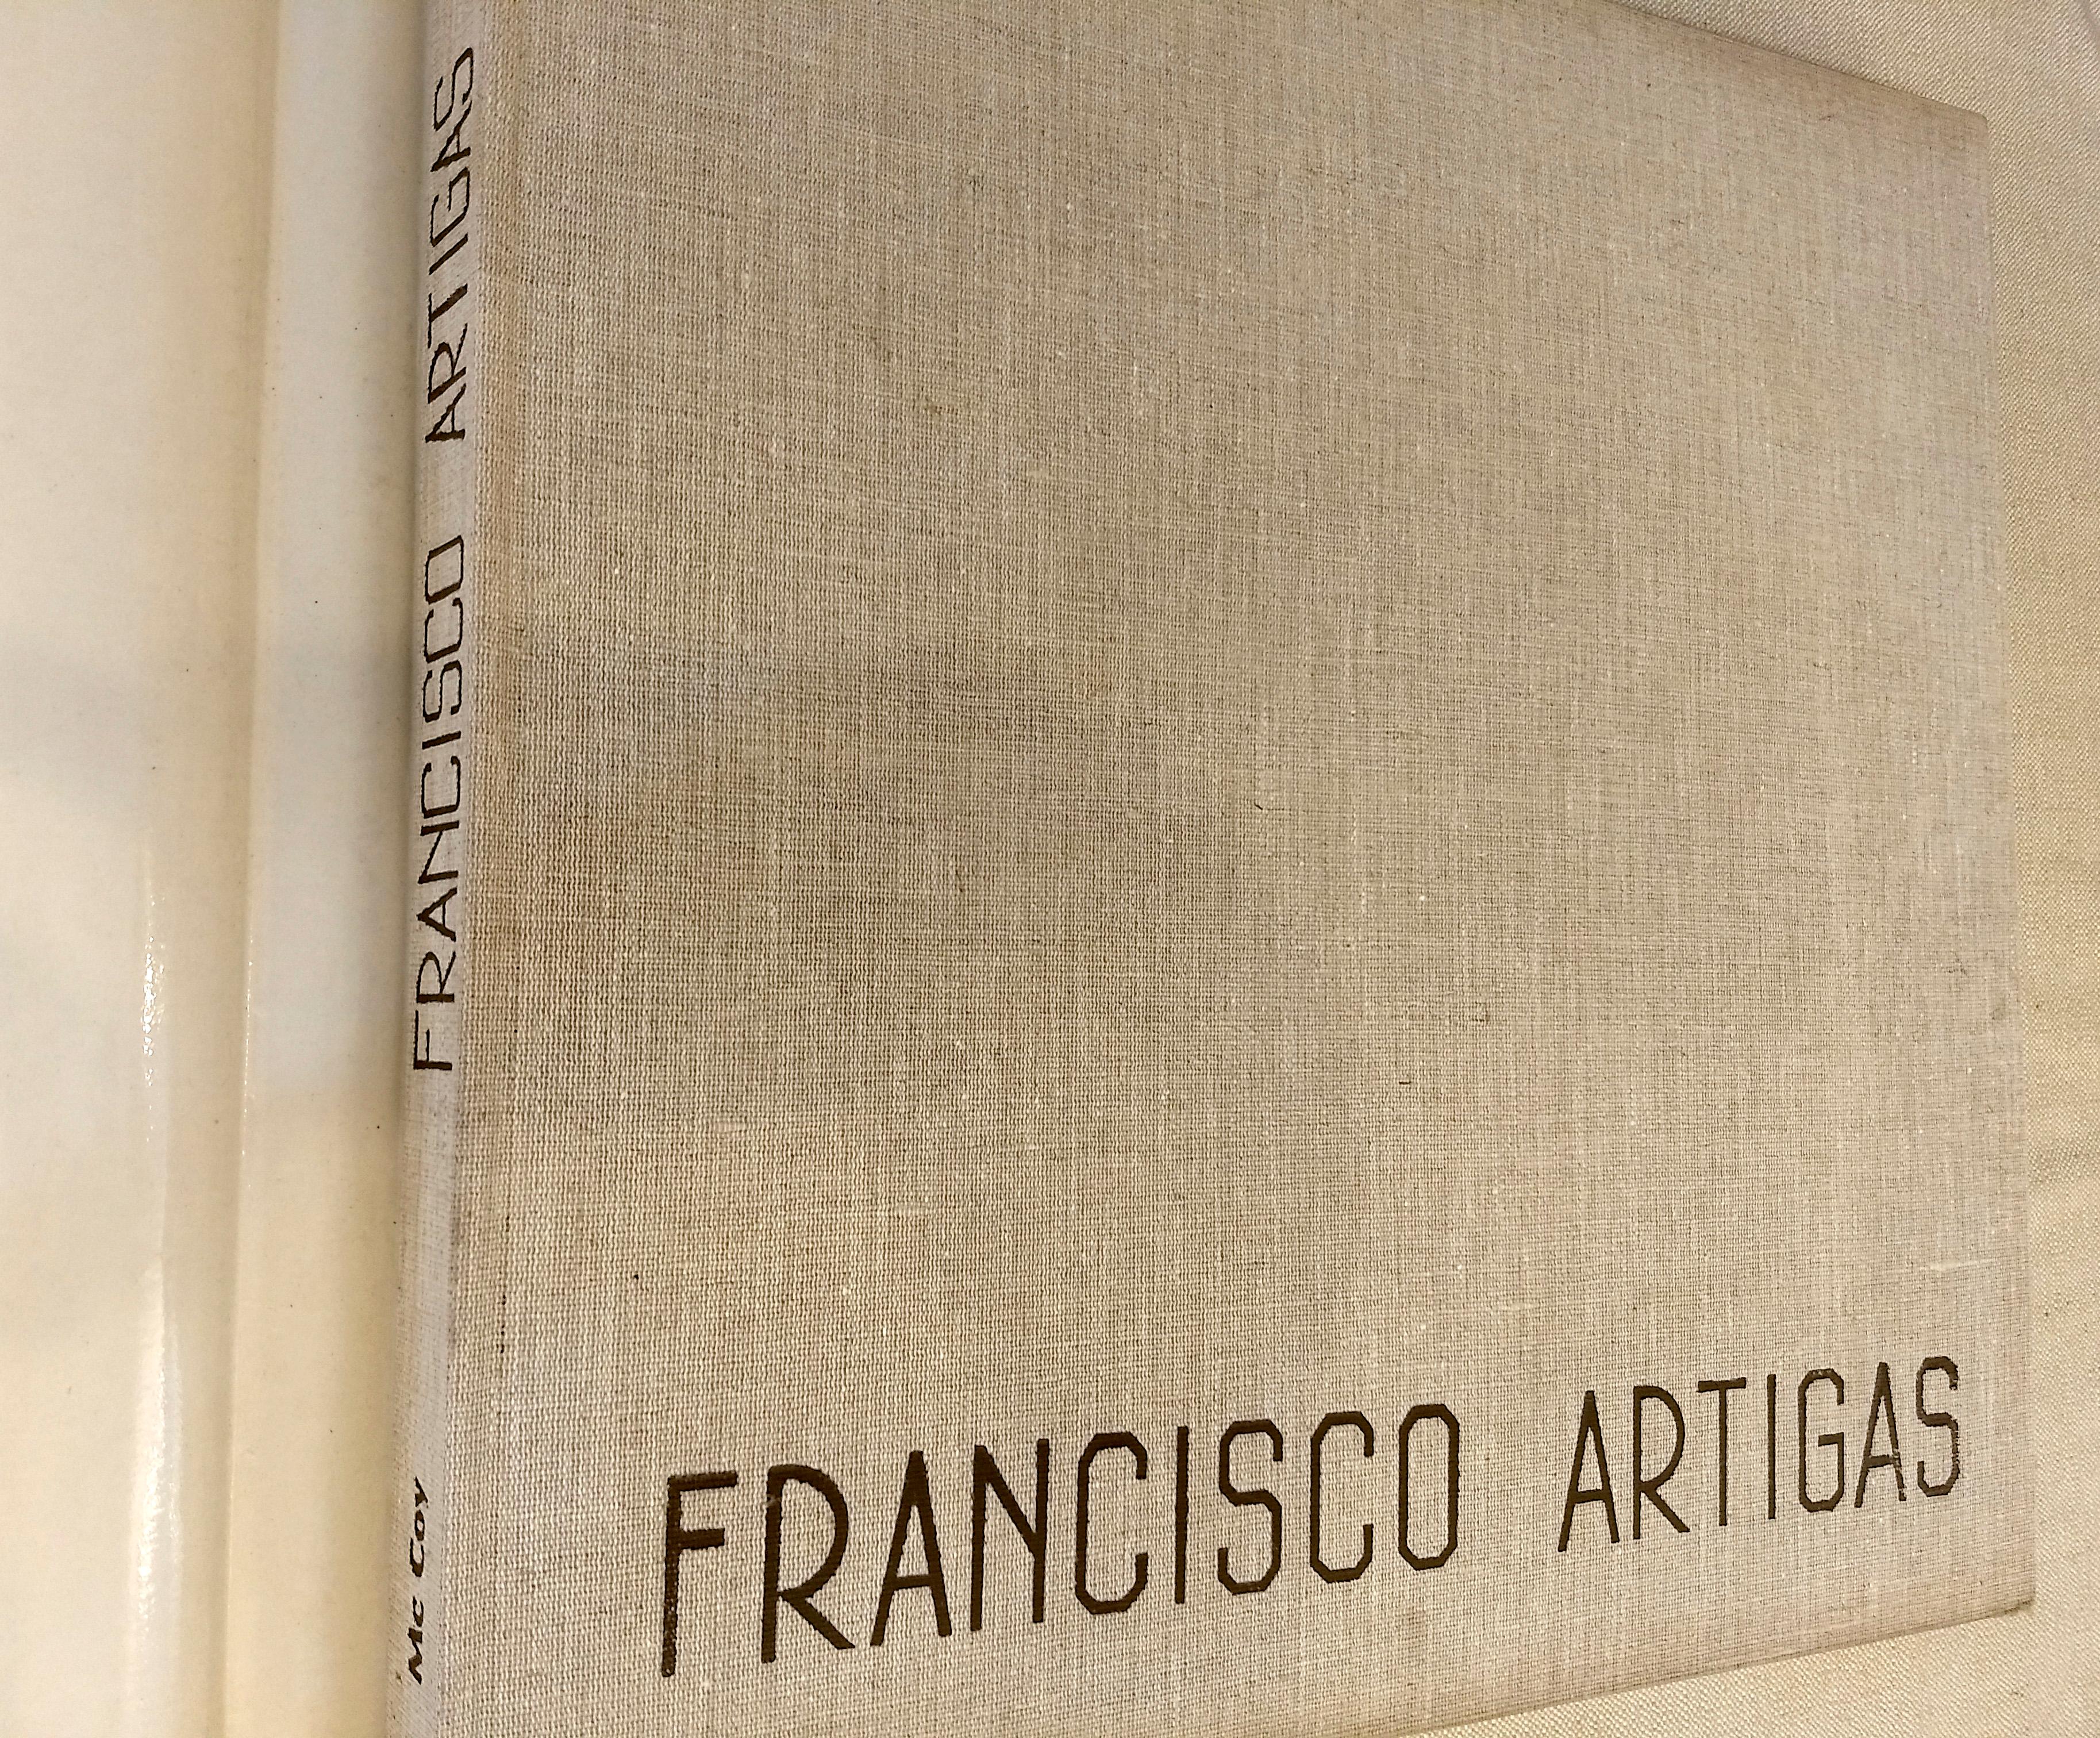 Hugely interesting and rare large format book showcasing the work of Francisco Artigas (1916-1999), a self taught Mexican architect, designer and constructor of private urban and vacation homes as well as public buildings, hotels and public schools